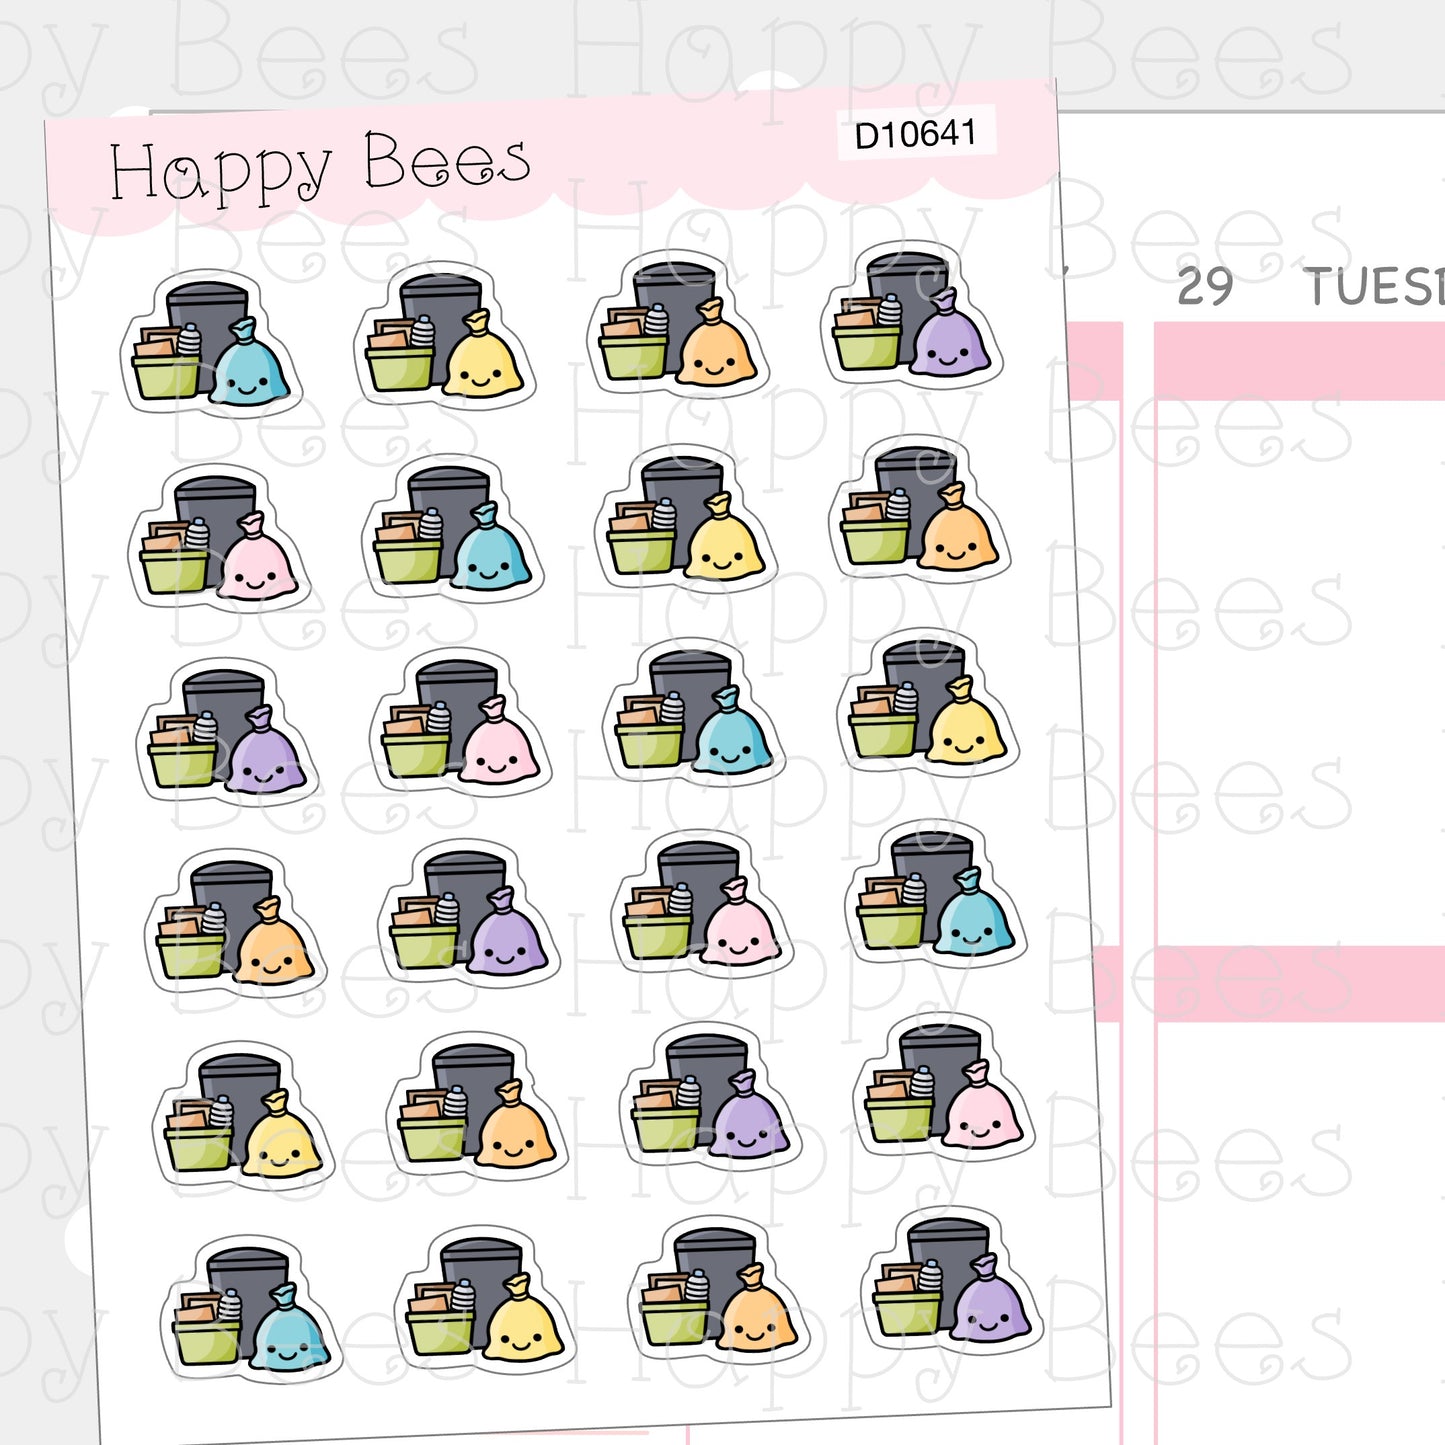 Garbage Day Doodles - Cute Chores Household Planner Stickers D10641